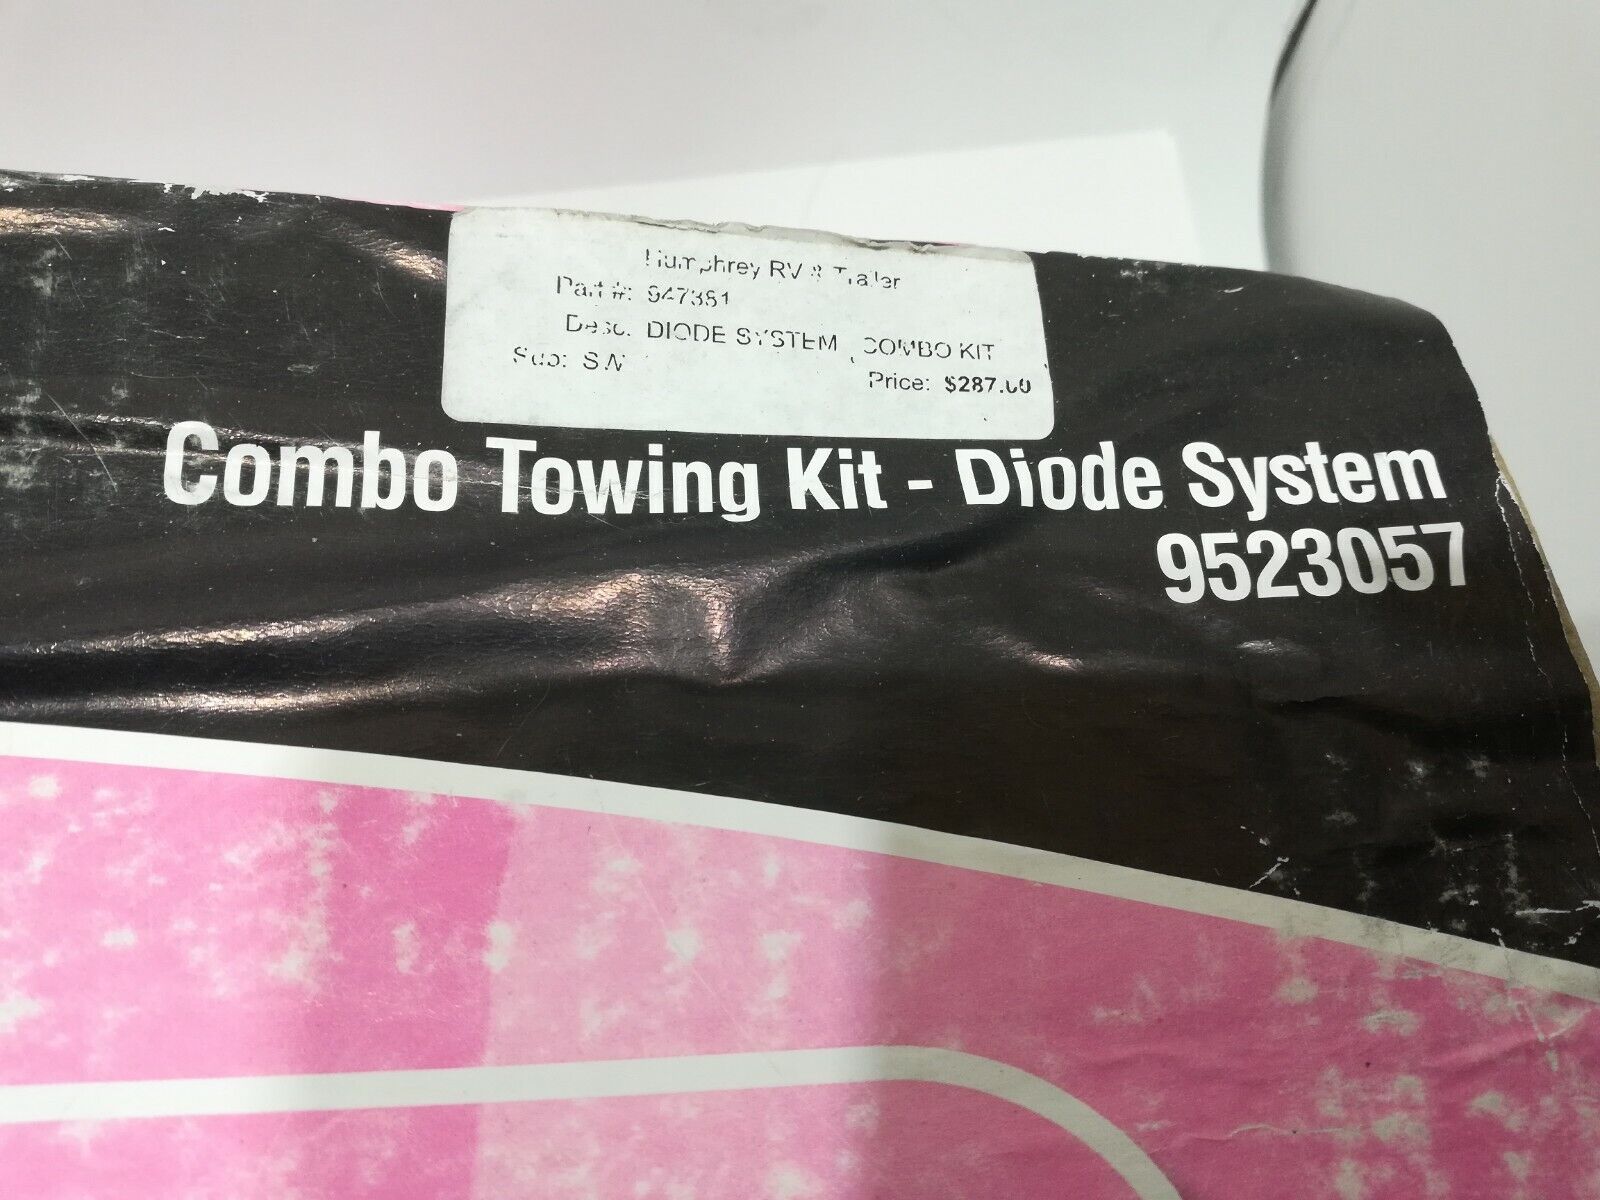 Demco Combo Towing kit Diode System 9523057 NIOB eBay